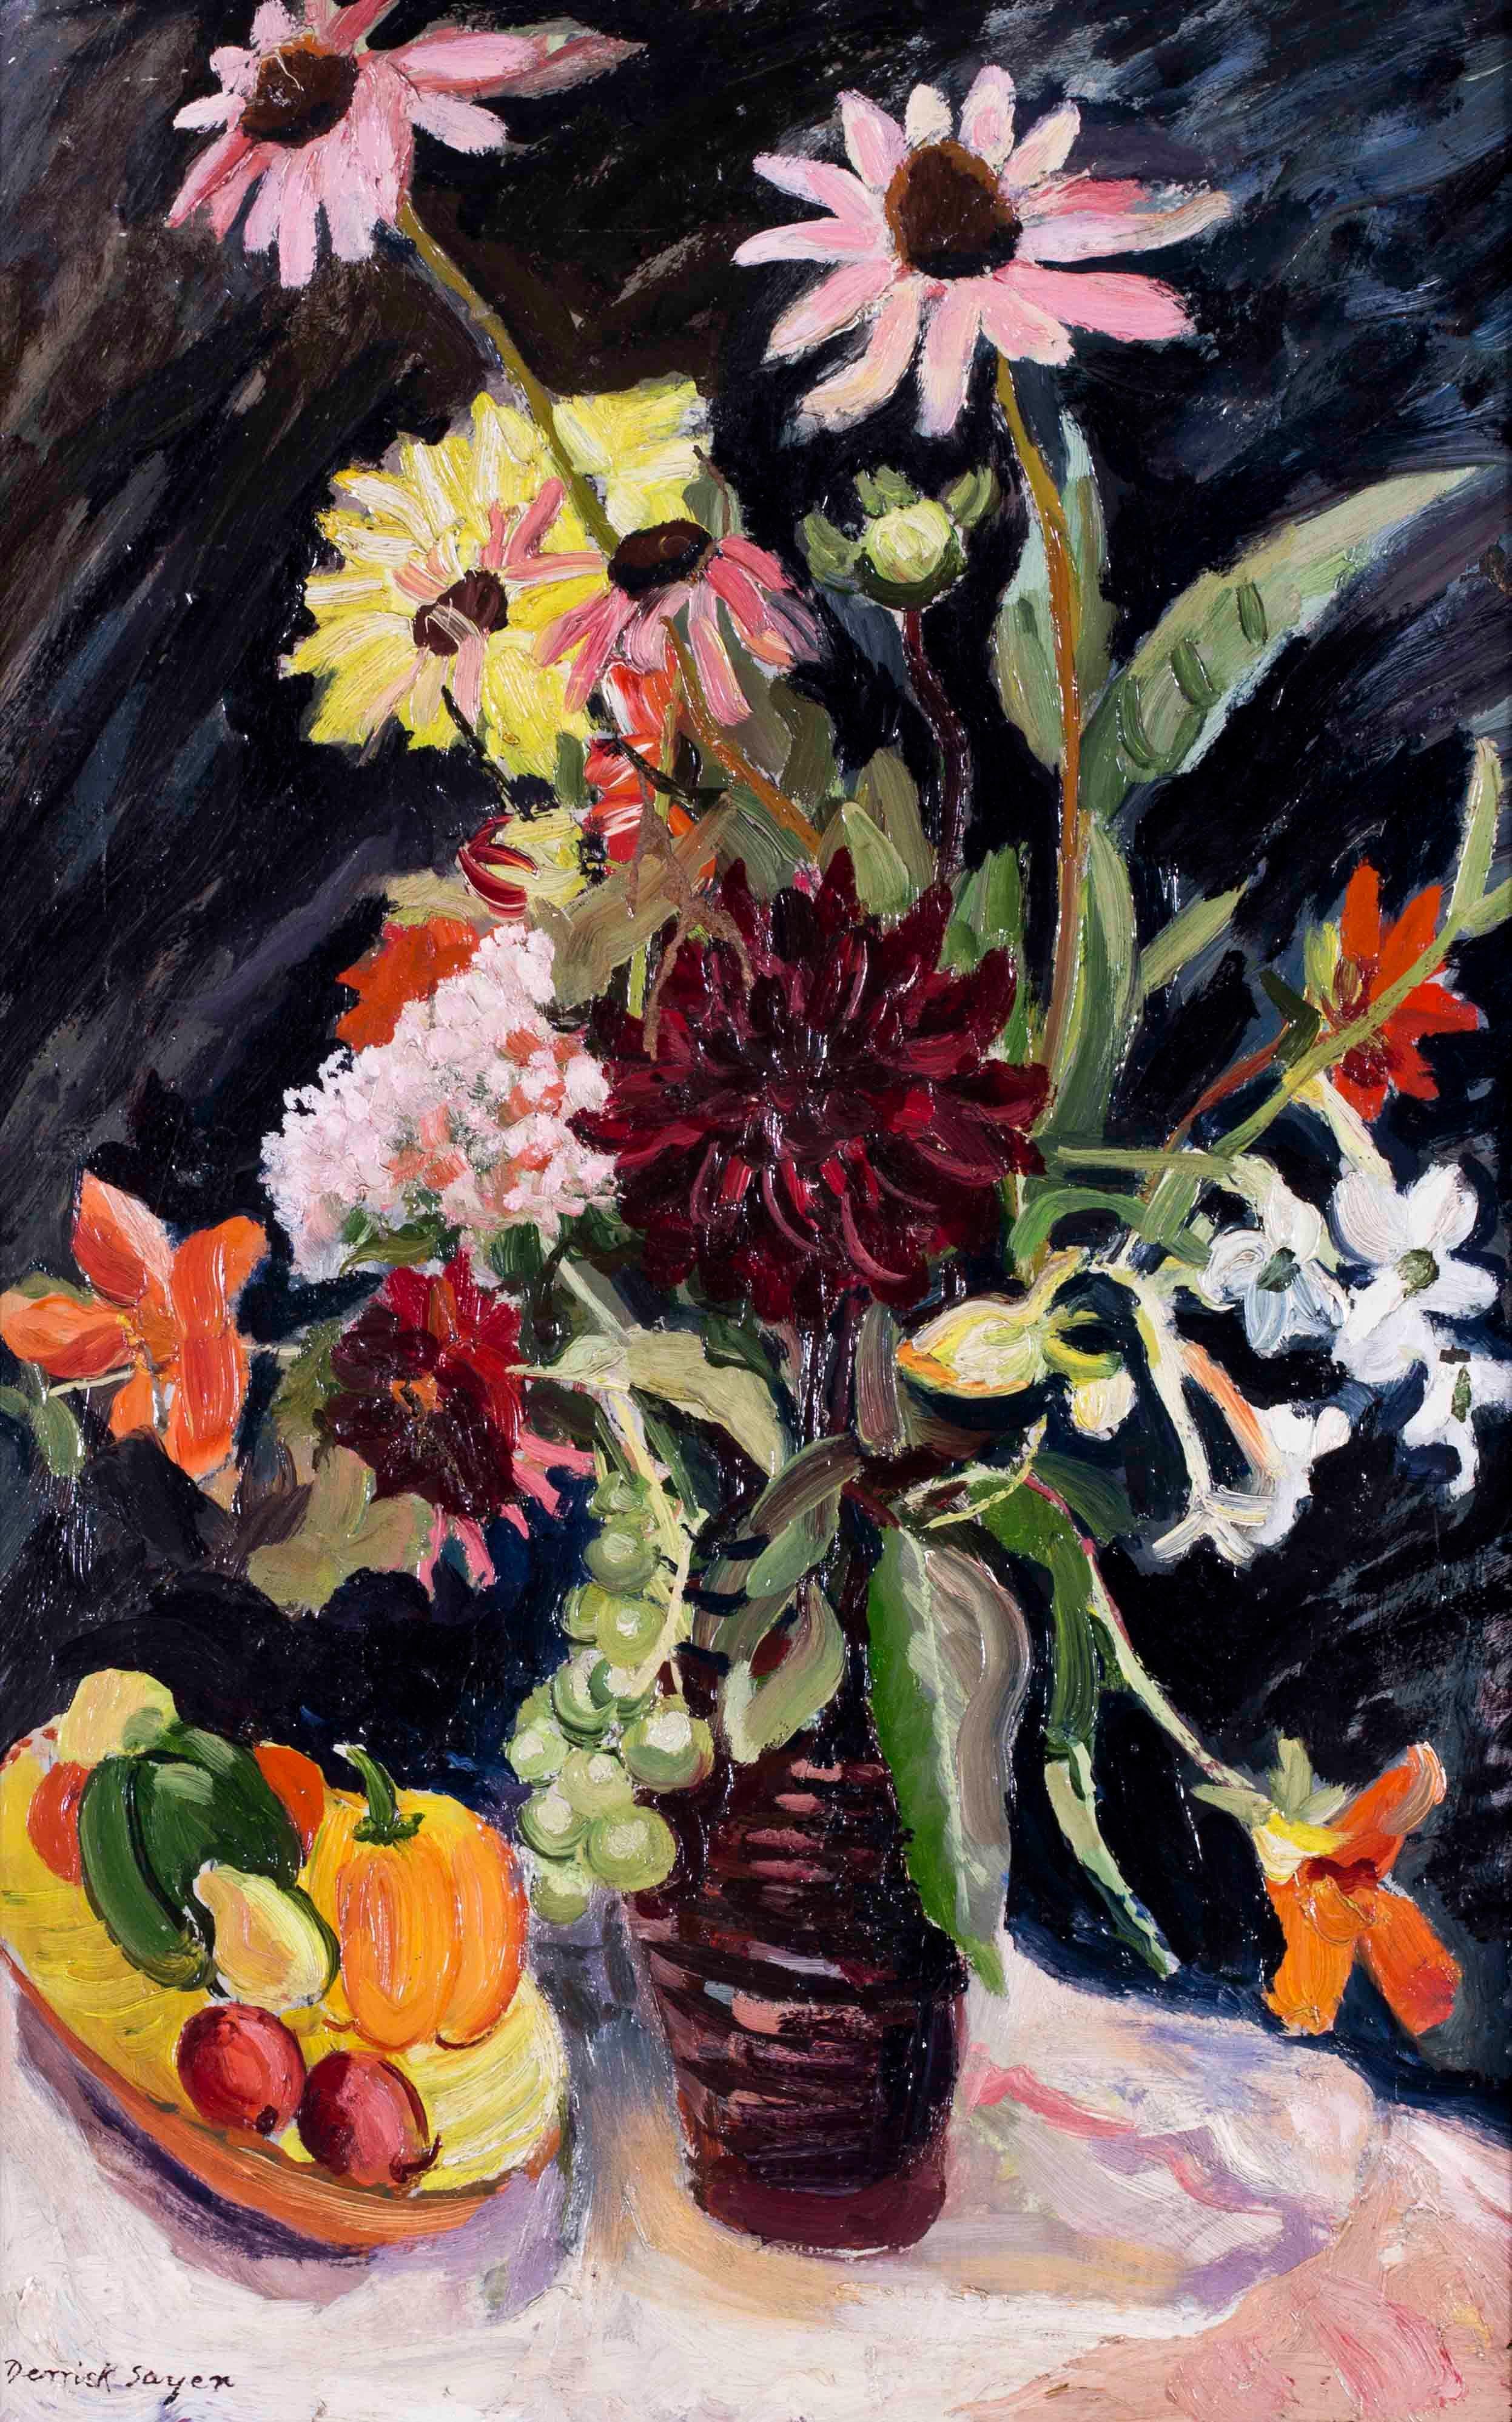 British 20th Century oil painting of a vase of flowers on a black background - Painting by Derrick Latimer Sayer